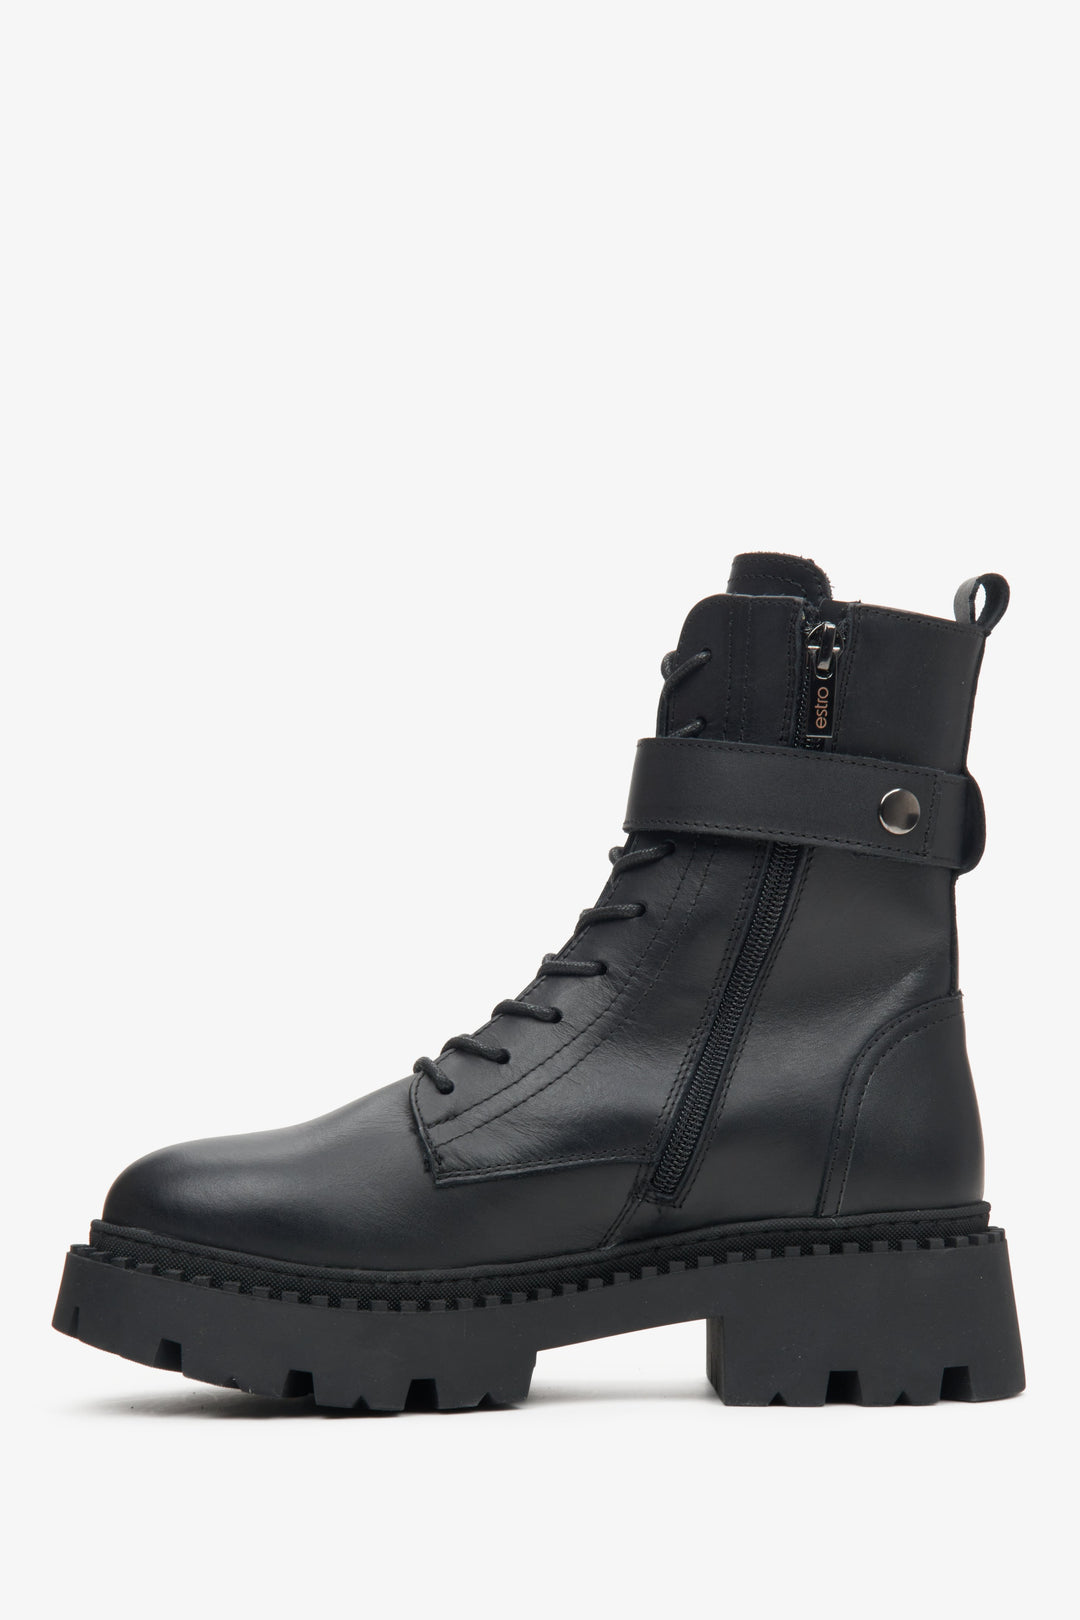 Women's leather black winter boots with insulation and a decorative strap - shoe profile.